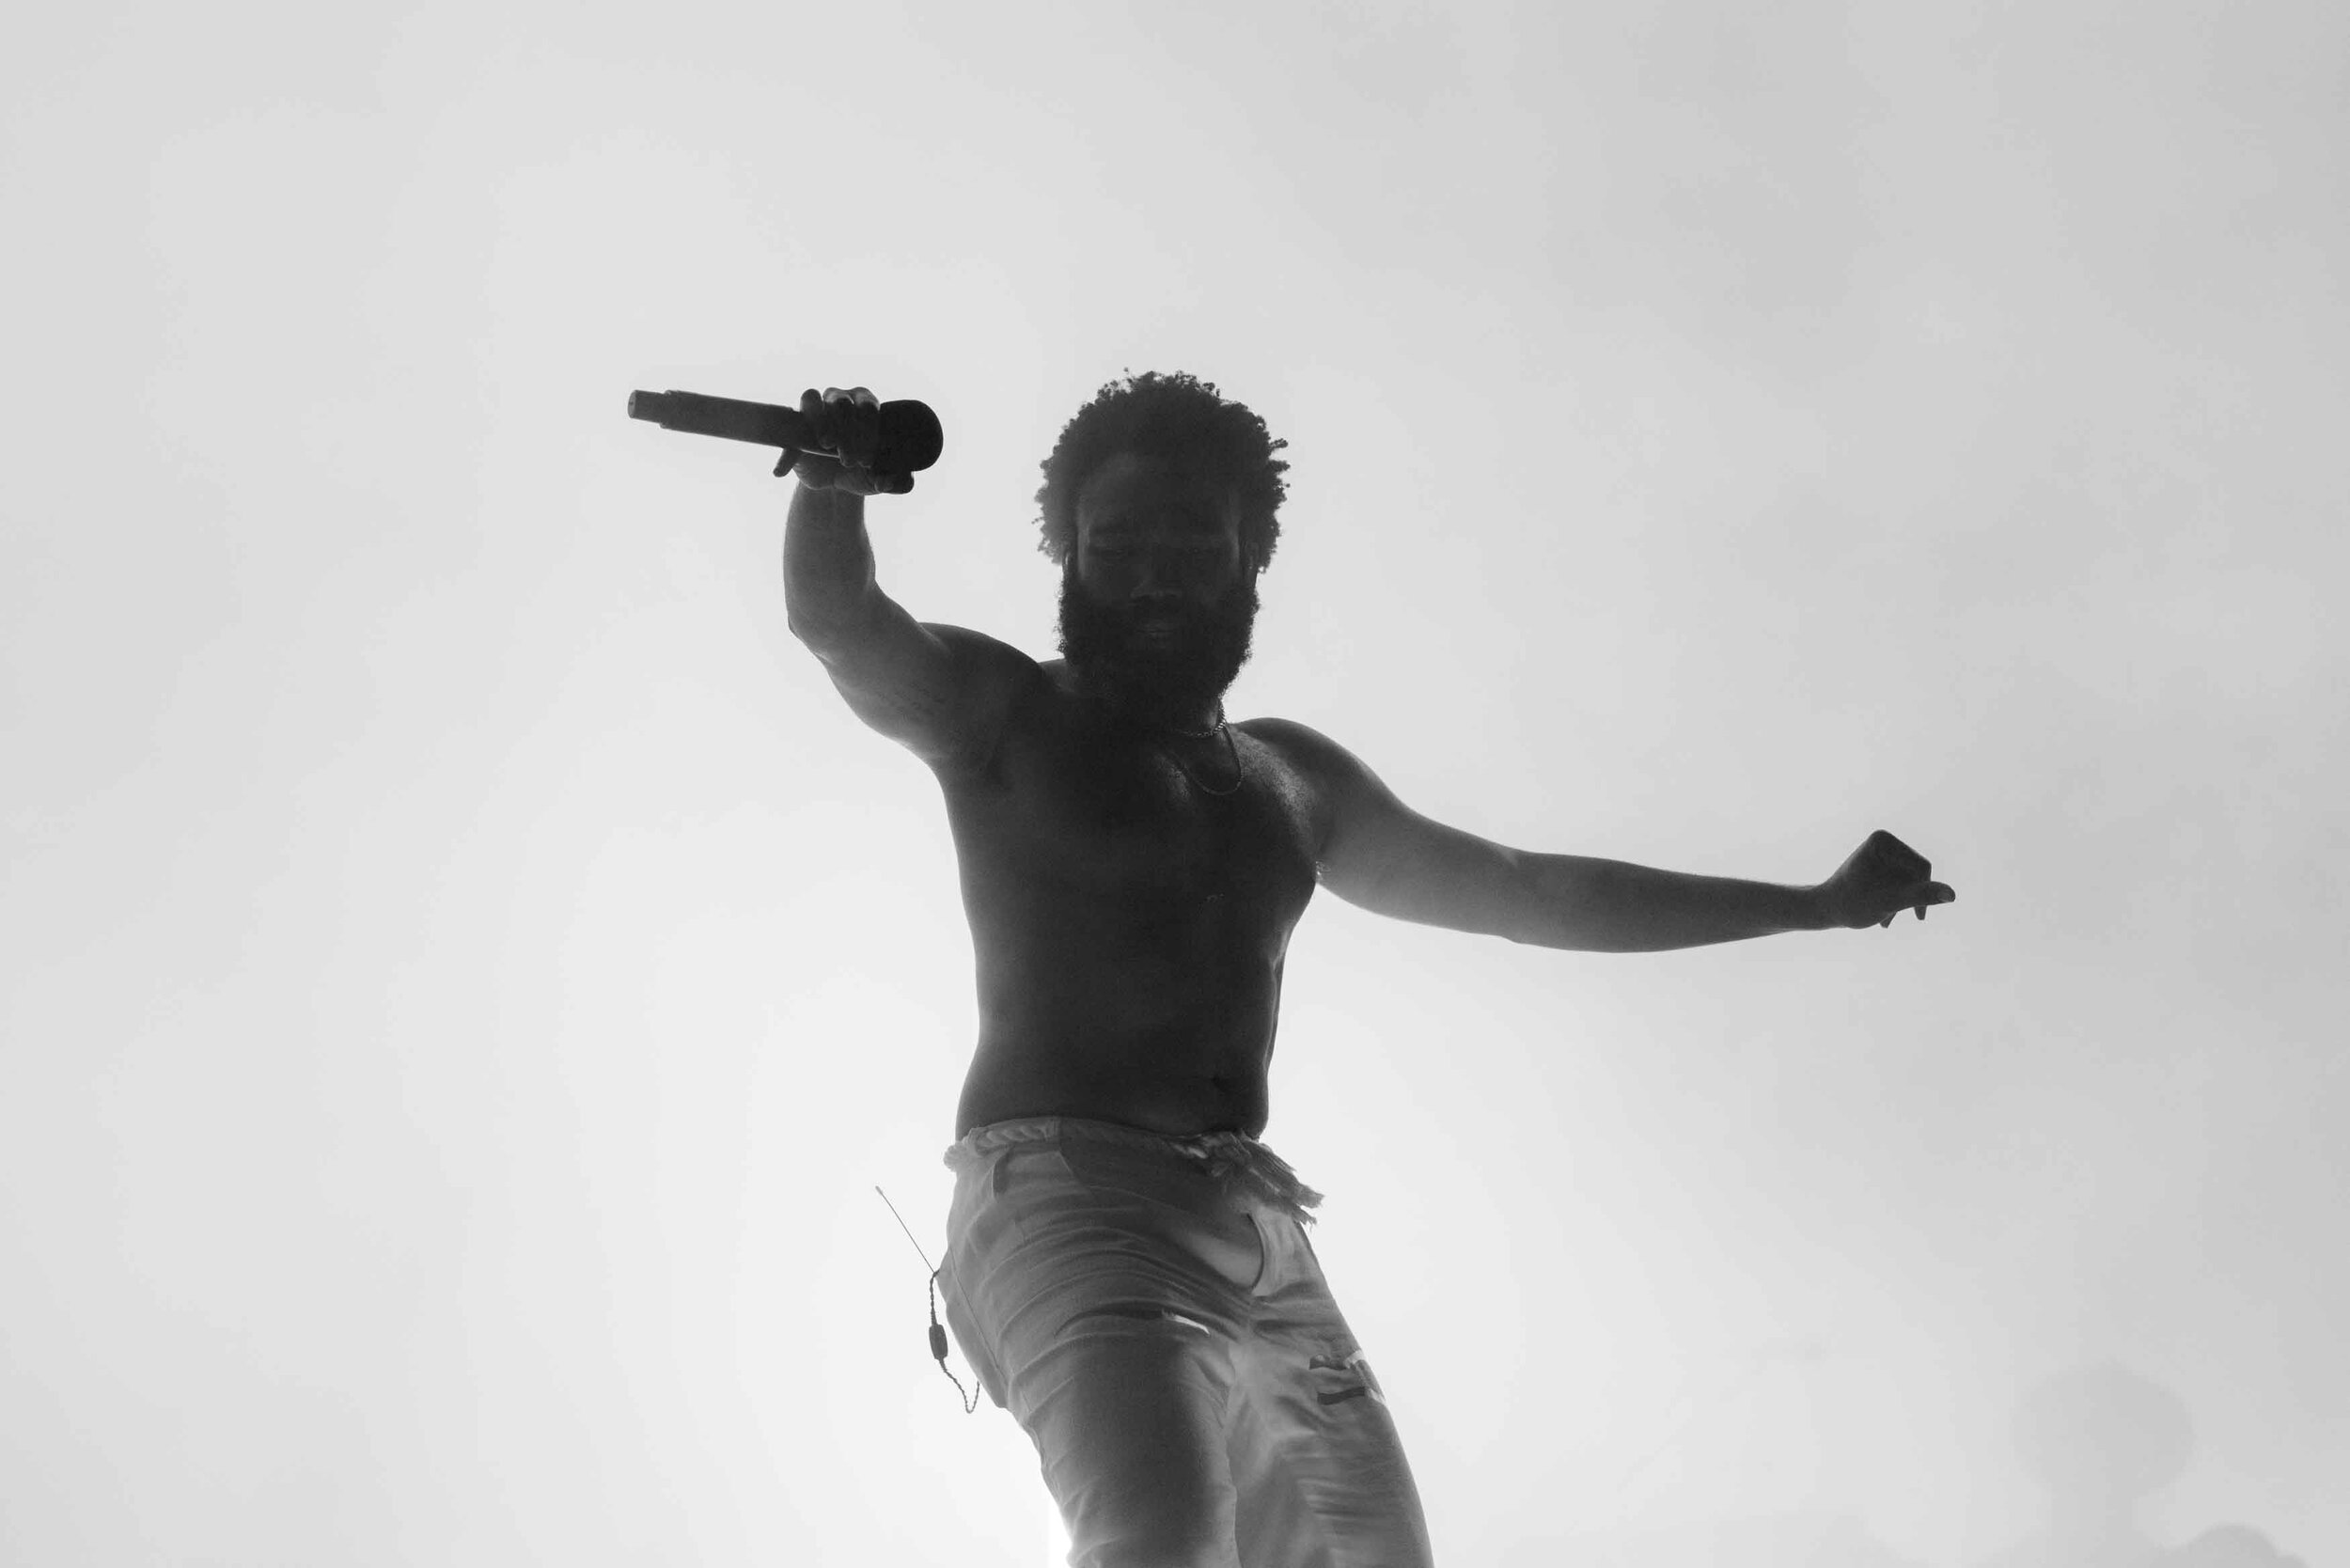 Childish Gambino By Greg Noire for ACL Fest W2 2019 GN_02856.jpg